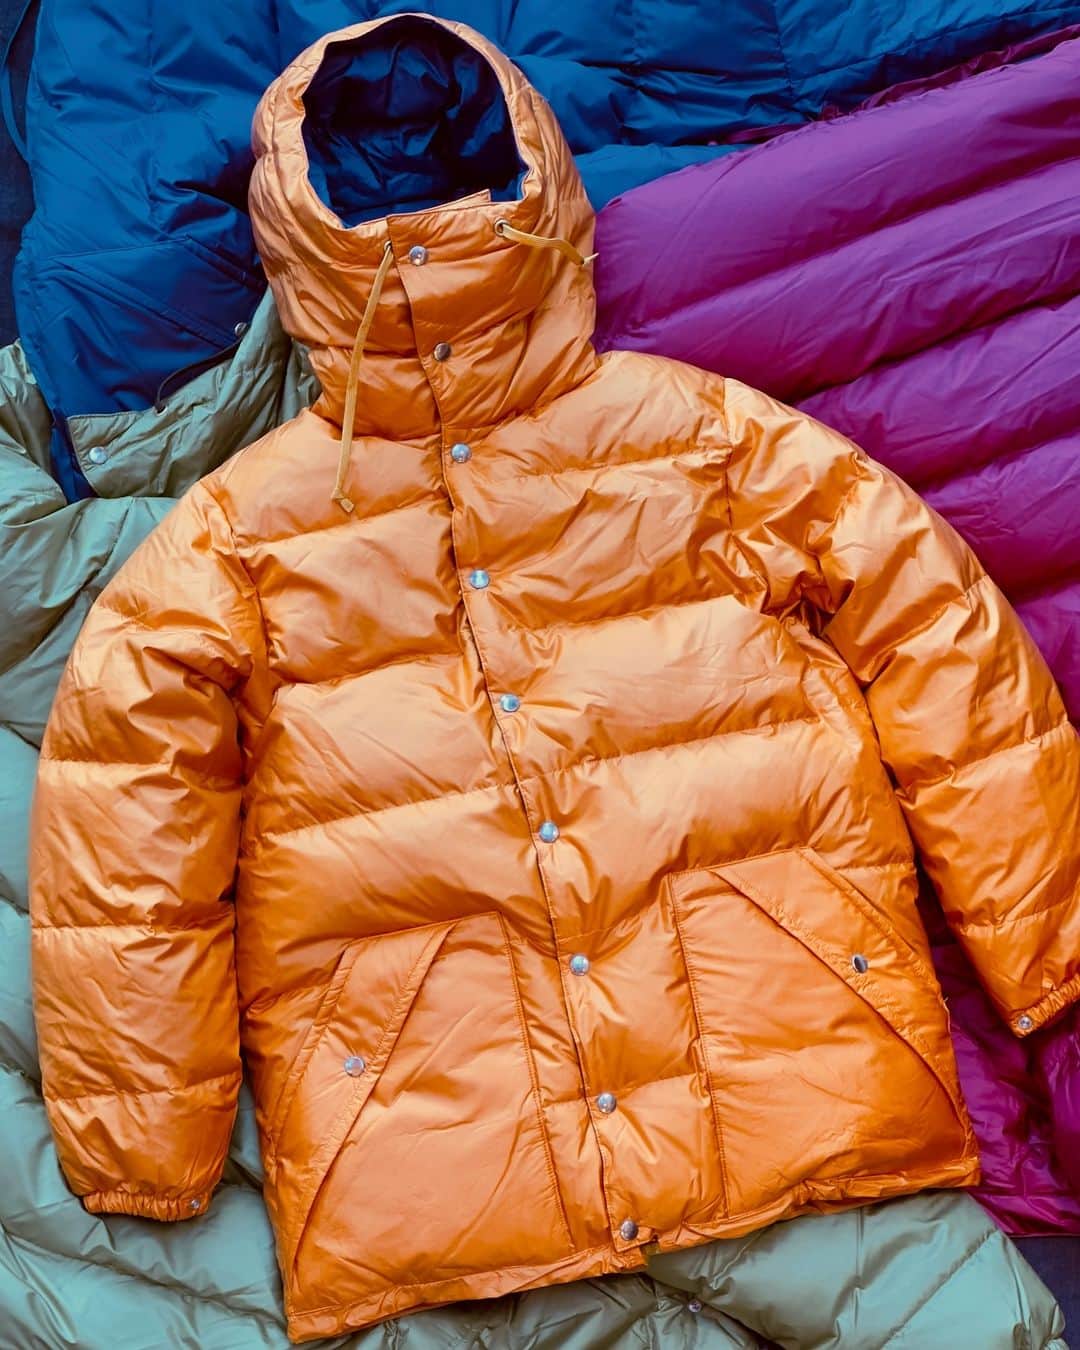 BEAMS+のインスタグラム：「・   BEAMS PLUS RECOMMEND  〈BEAMS PLUS〉  EXPEDITION DOWN  Based on a vintage outdoor down jacket, this jacket has been updated to modern specifications, with 800-fill-power padding made of luxurious, high-quality down from ALLIED FEATHER DOWN.  -------------------------------------  ヴィンテージのアウトドアダウンジャケットをベースに現代仕様にアップデート。800フィルパワーの中綿はALLIED FEATHER DOWN社の高品質なダウンを贅沢に使用。   #beams #beamsplus #beamsplusharajuku   #mensfashion」